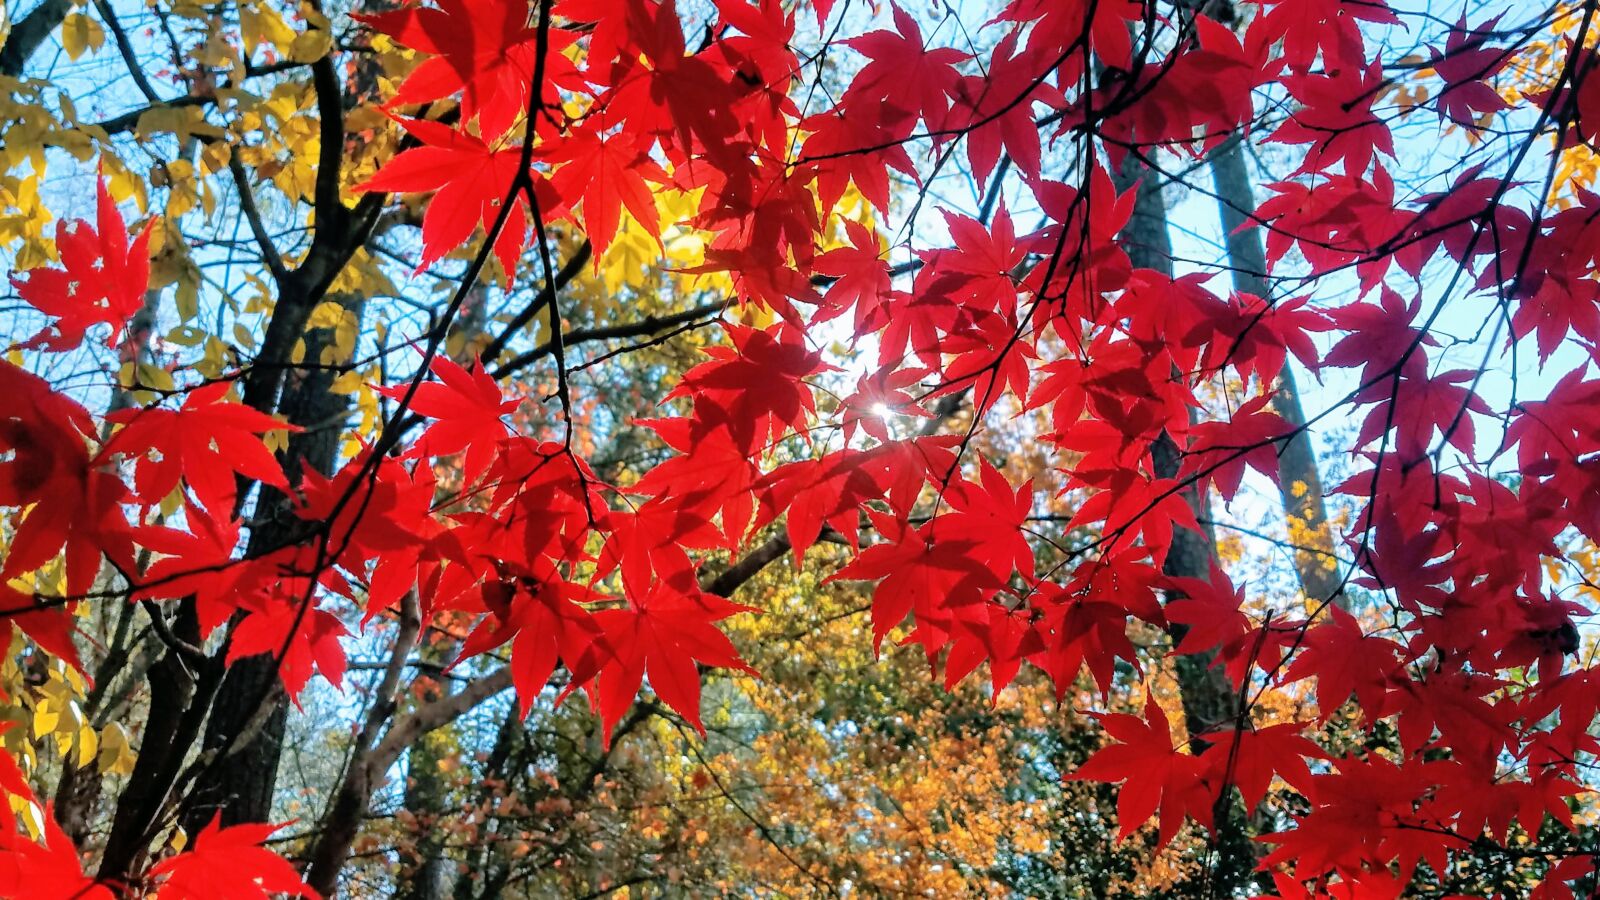 Samsung Galaxy S7 sample photo. Fall color, autumn, colorful photography